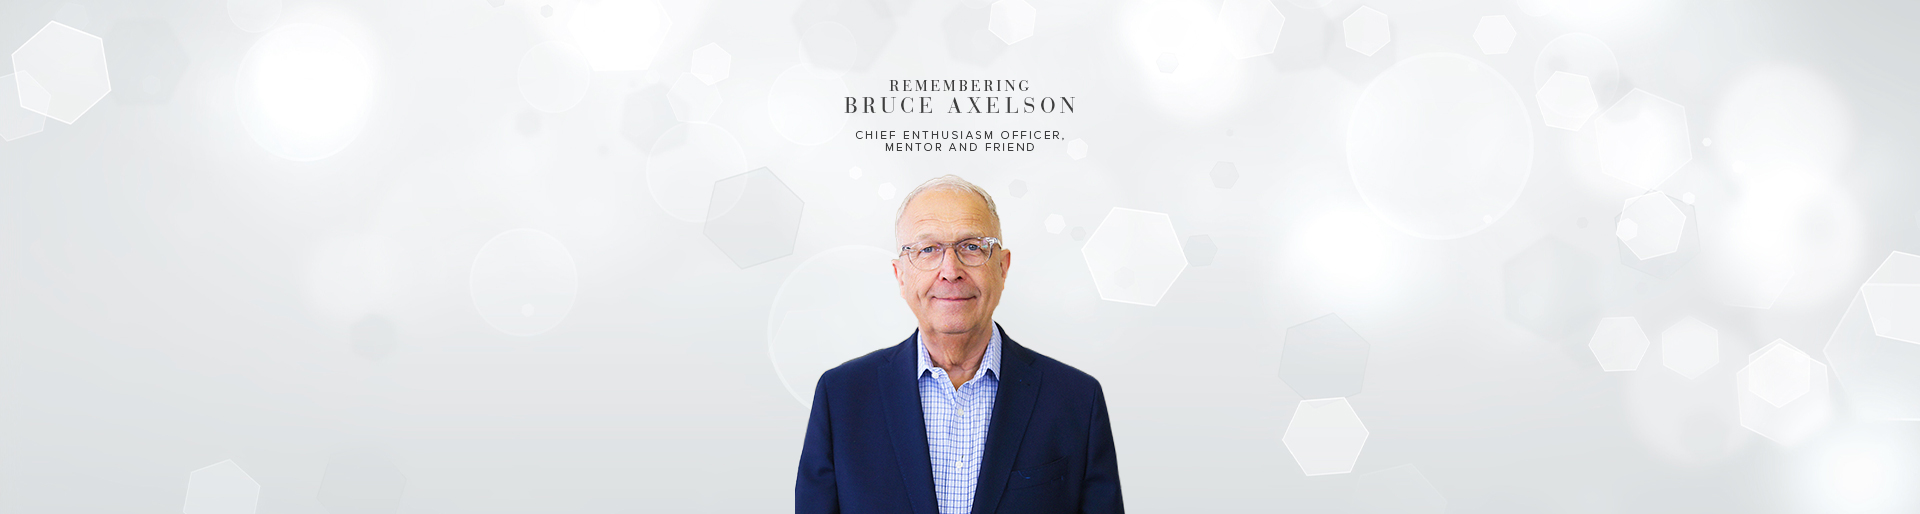 Remembering Bruce Axelson: Chief Enthusiasm Officer, Mentor, and Friend